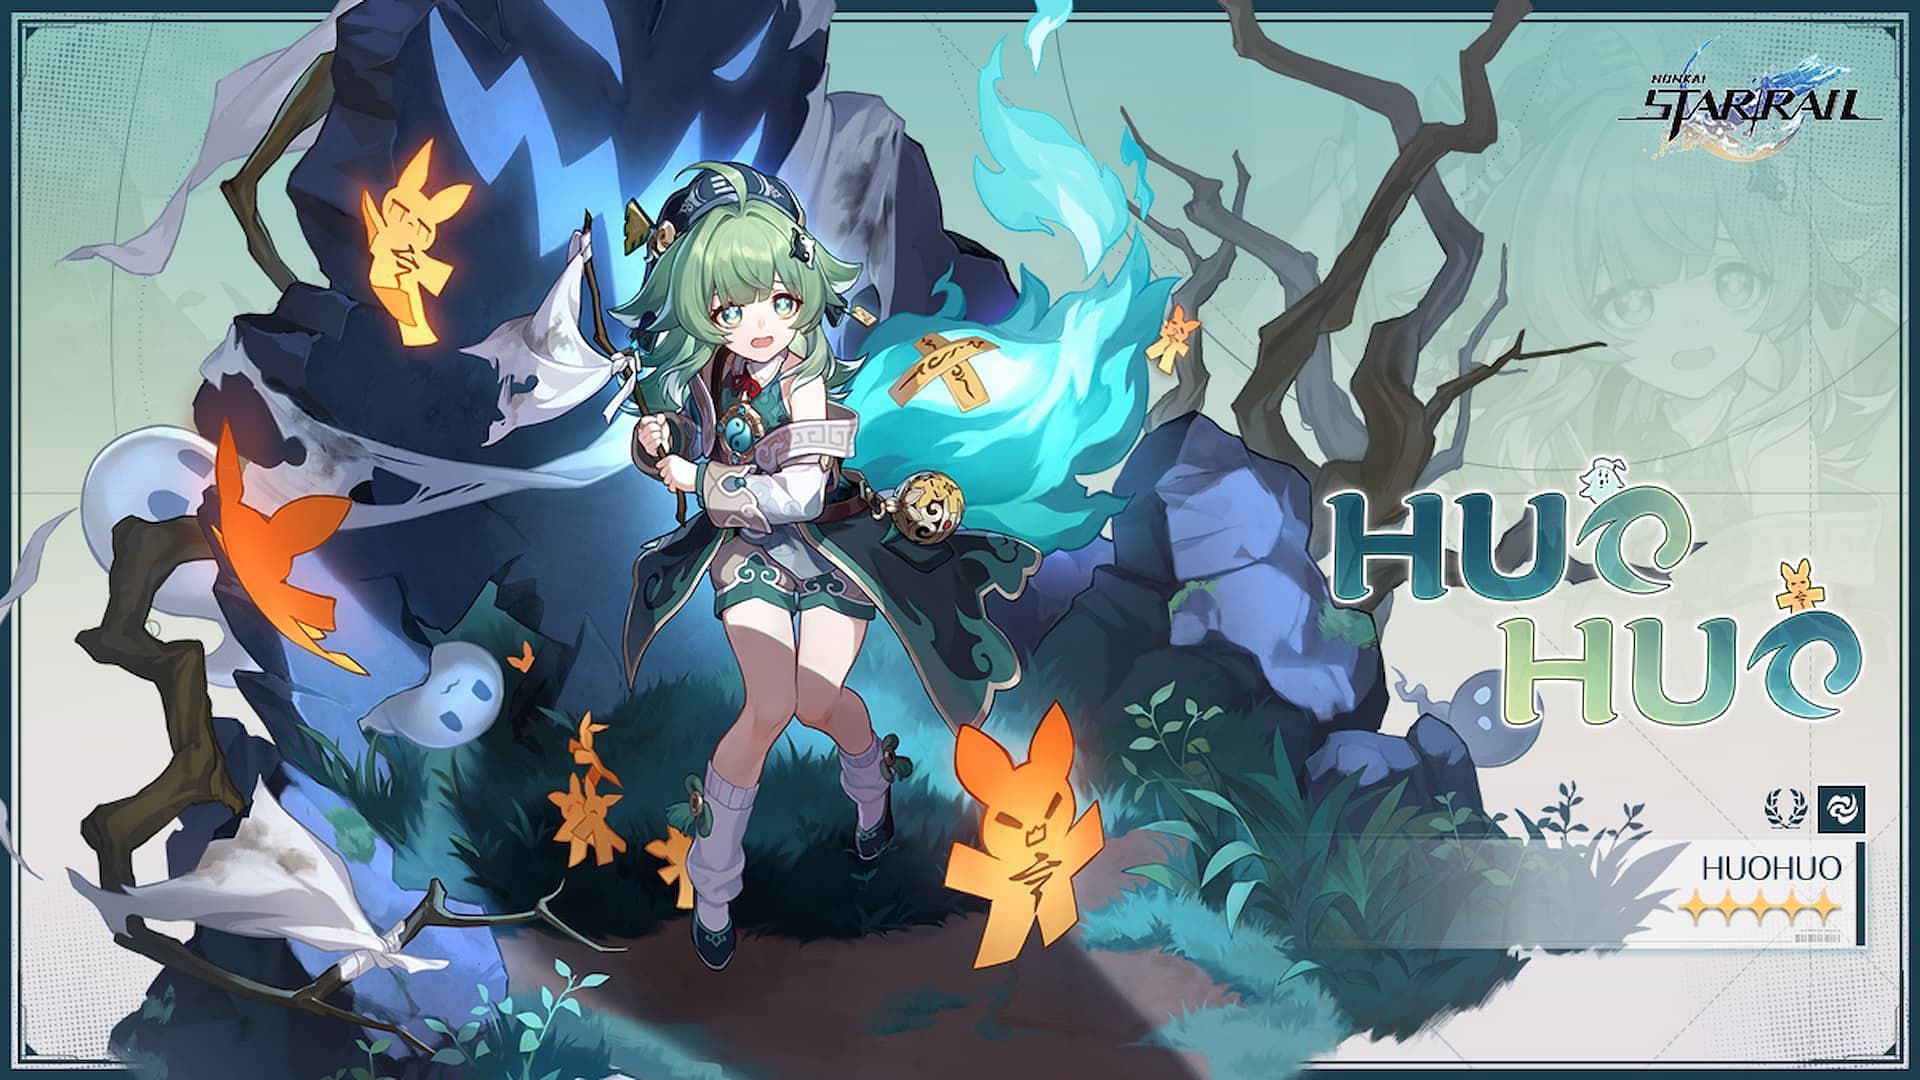 HuoHuo as depicted in her official artwork